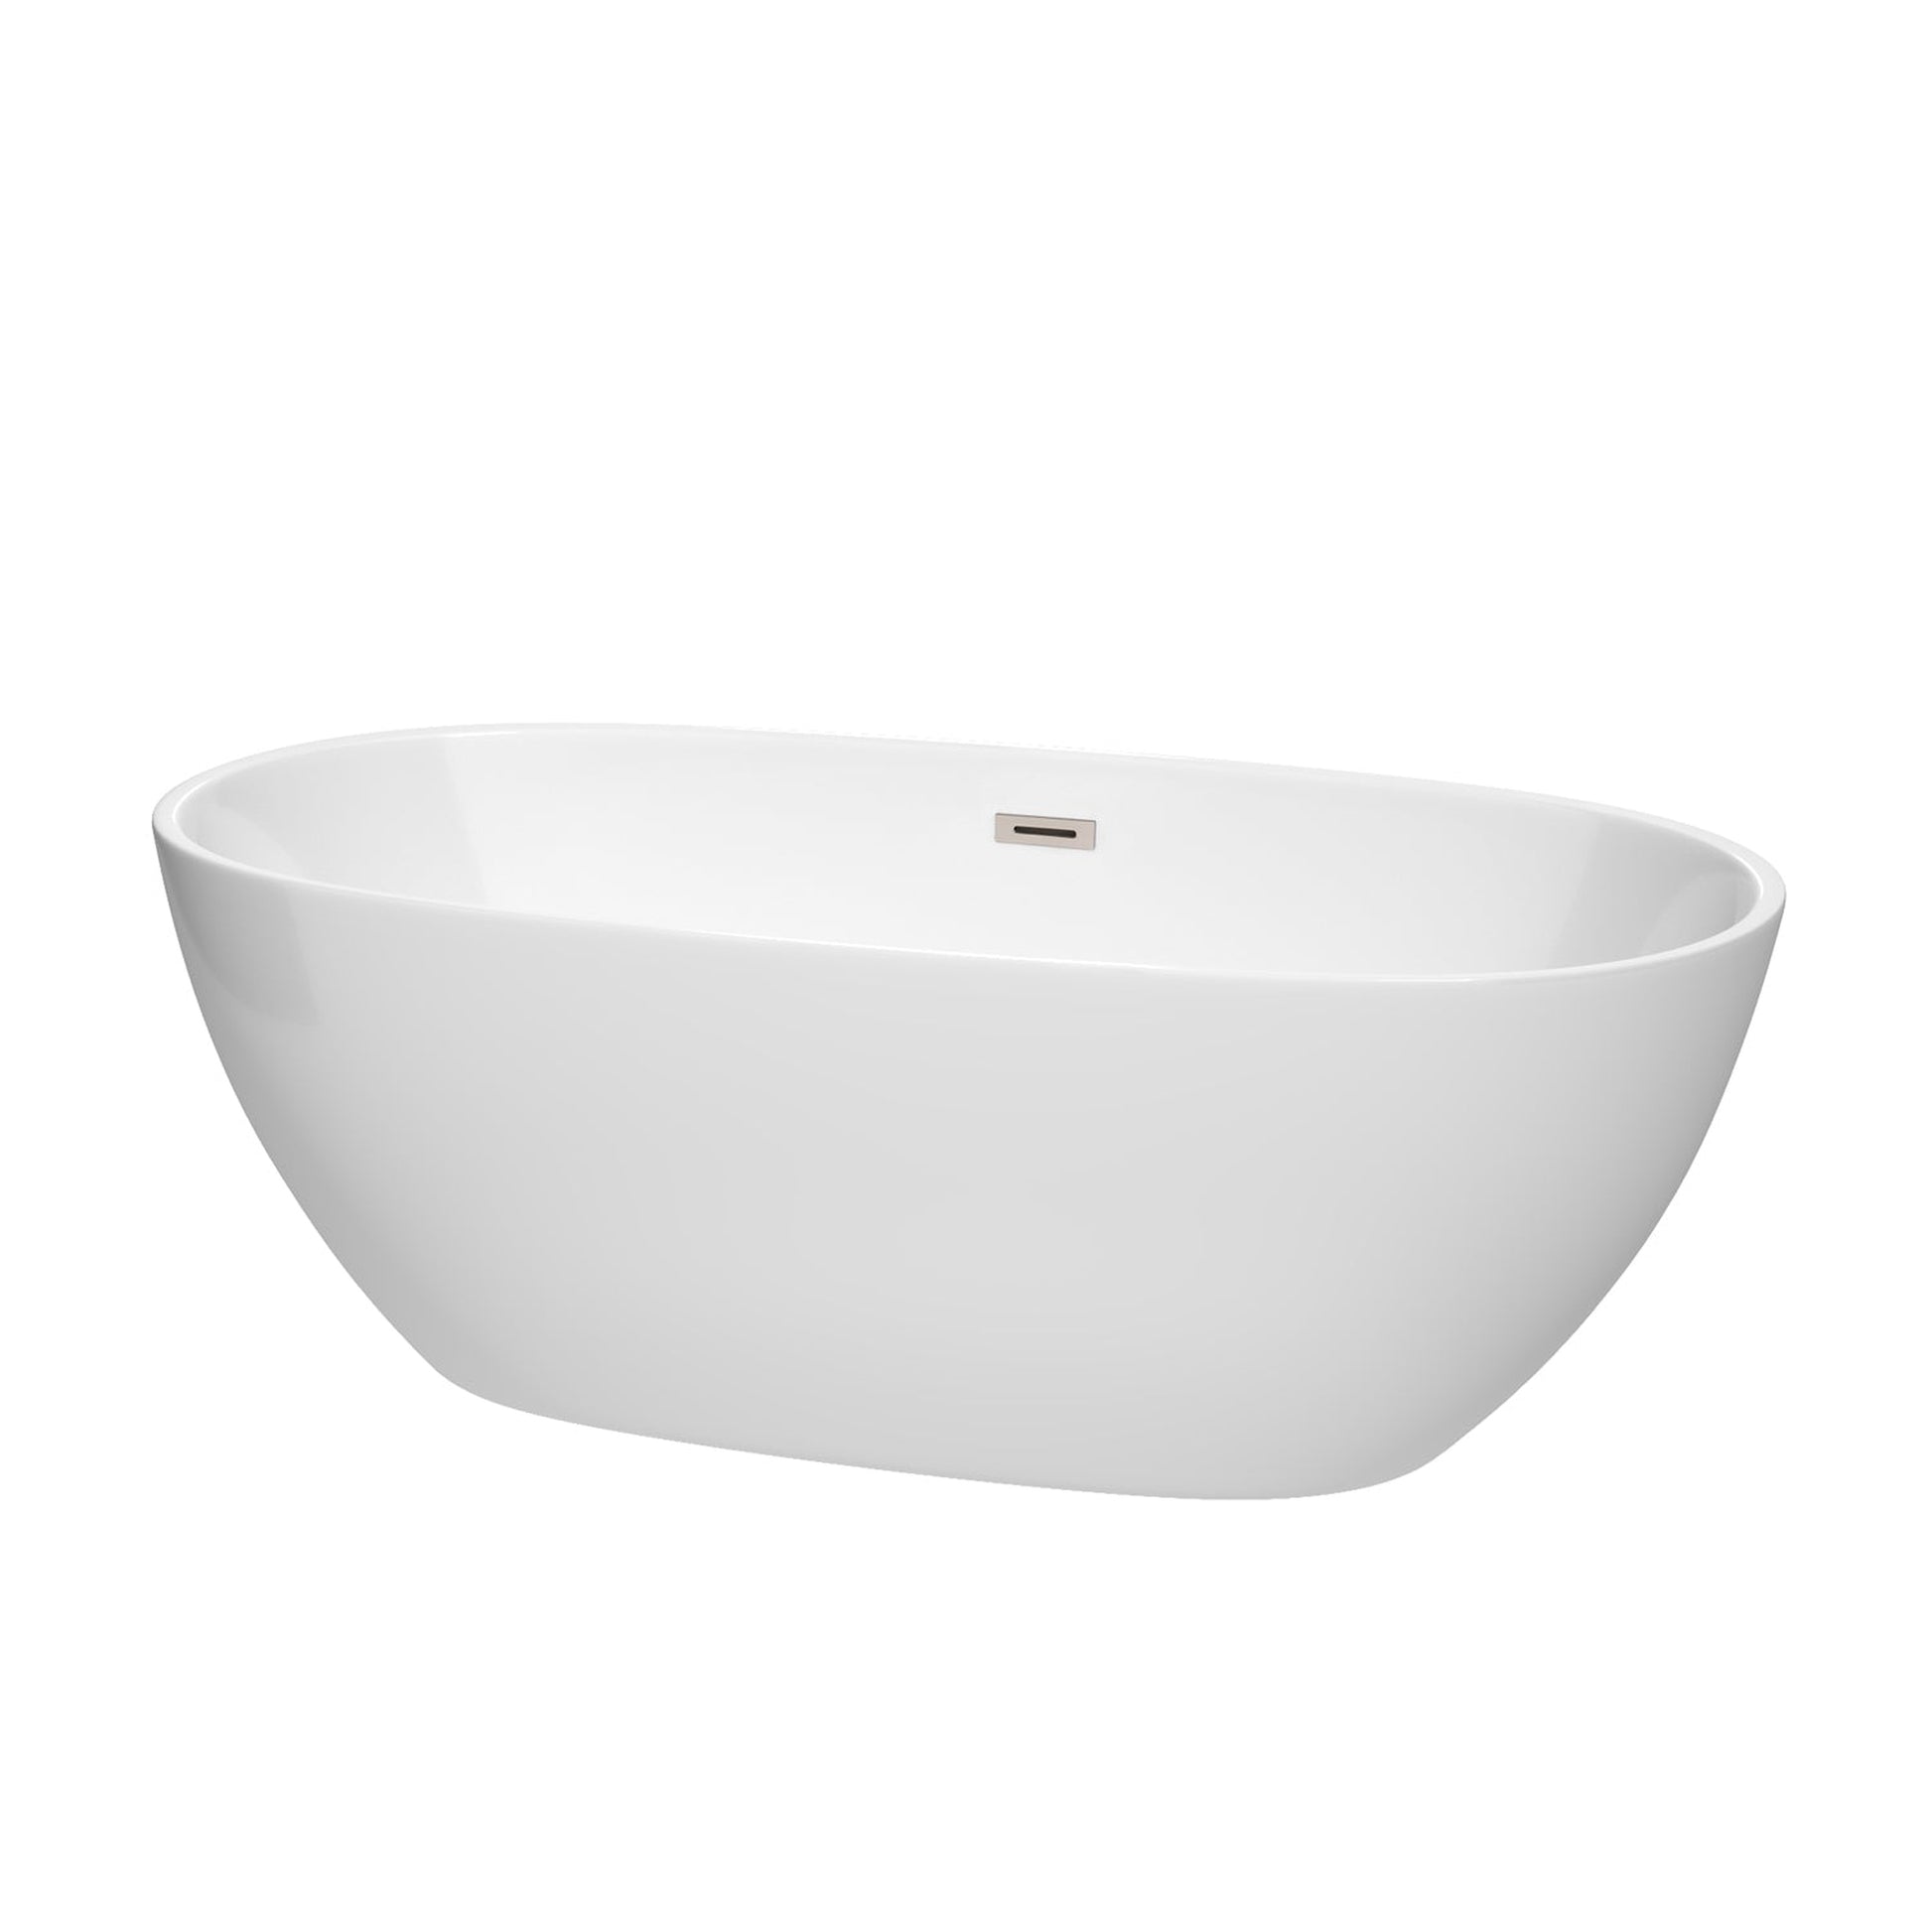 Wyndham Collection Juno 67" Freestanding Bathtub in White With Brushed Nickel Drain and Overflow Trim